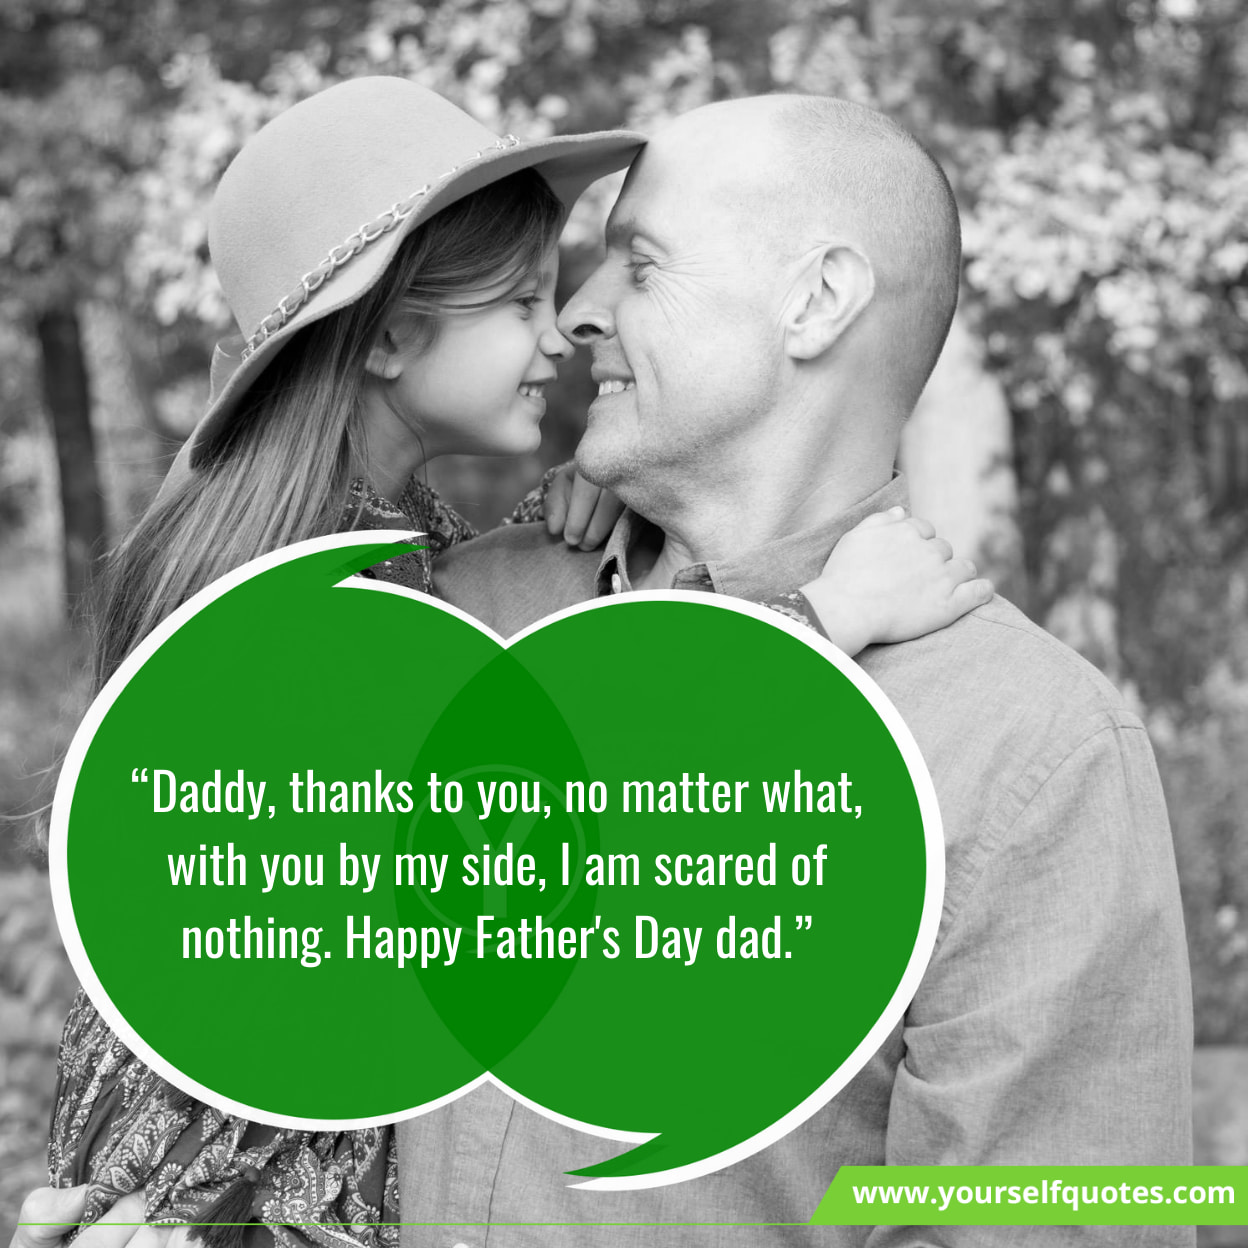 Happy Father Day Sayings & Greetings